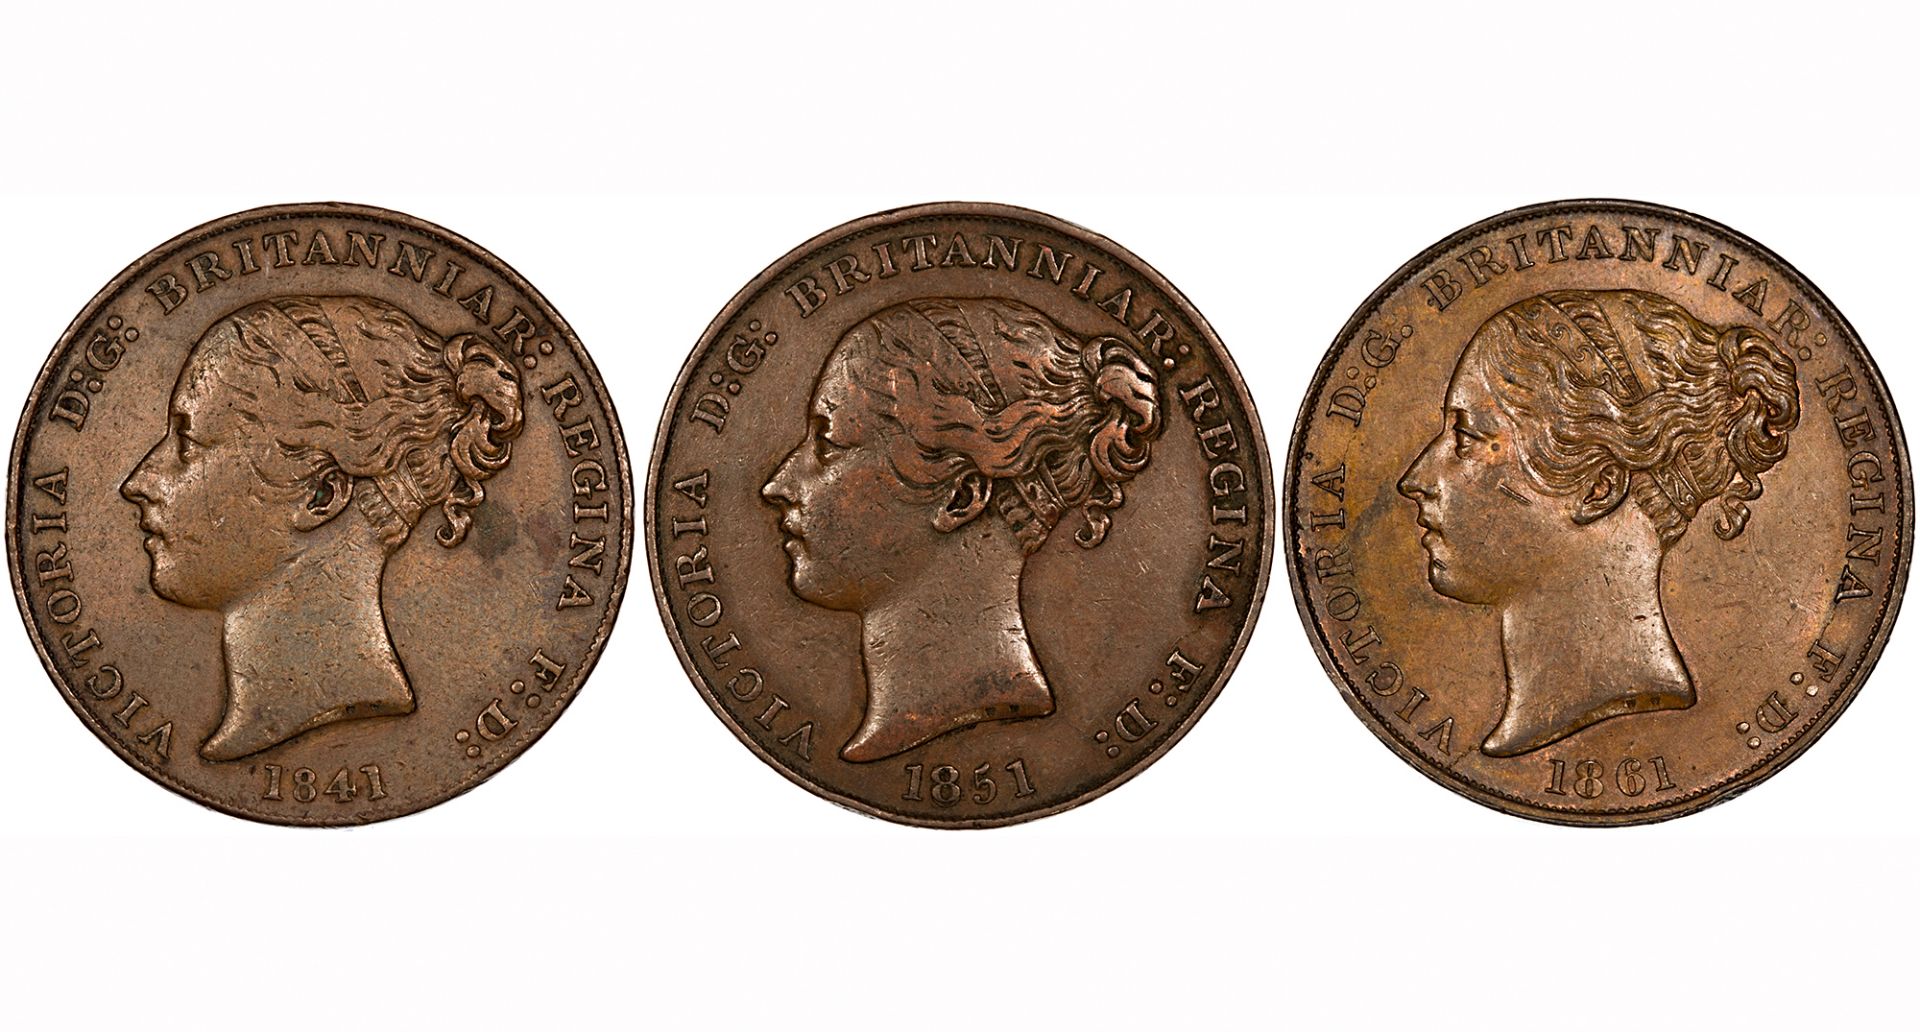 Channel Islands - Jersey Victoria 1/13 Shilling (3) 1841, 1851, 1861.